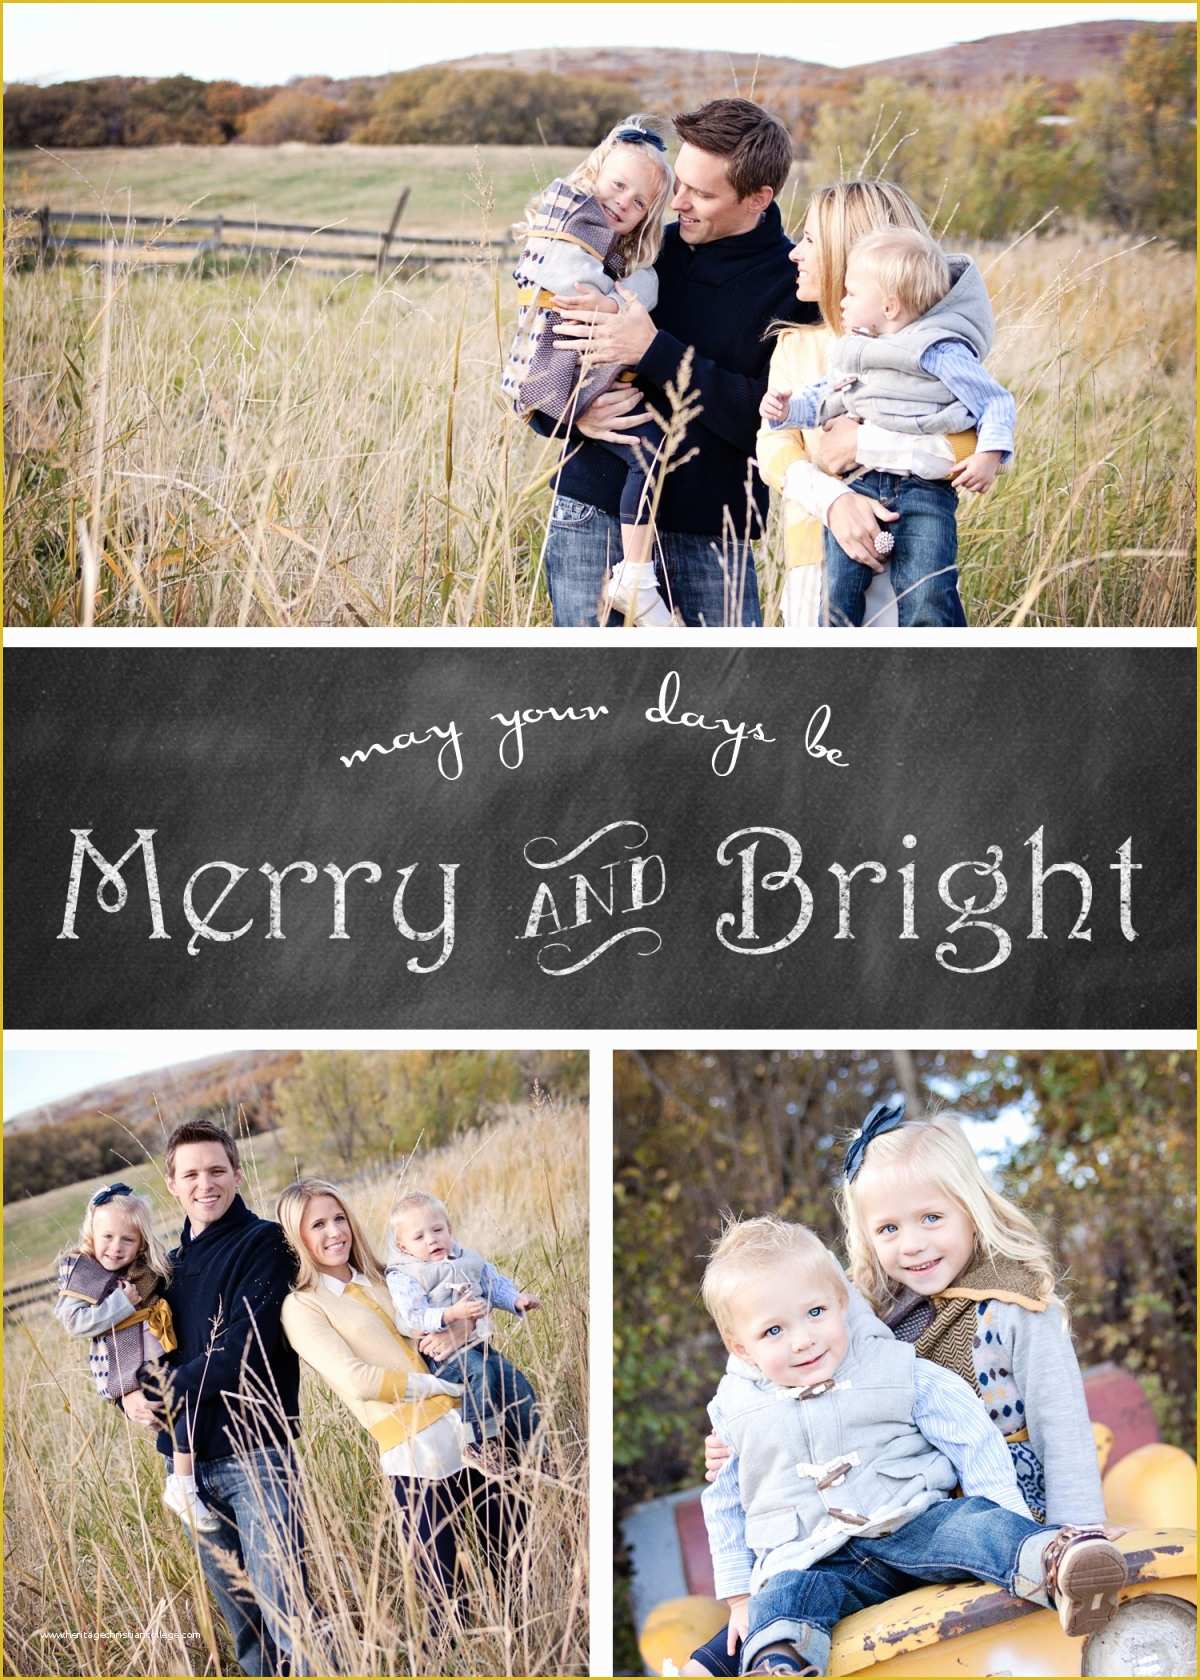 Free Christmas Photo Templates Of Free Chalkboard Christmas Card Templates Chelsea